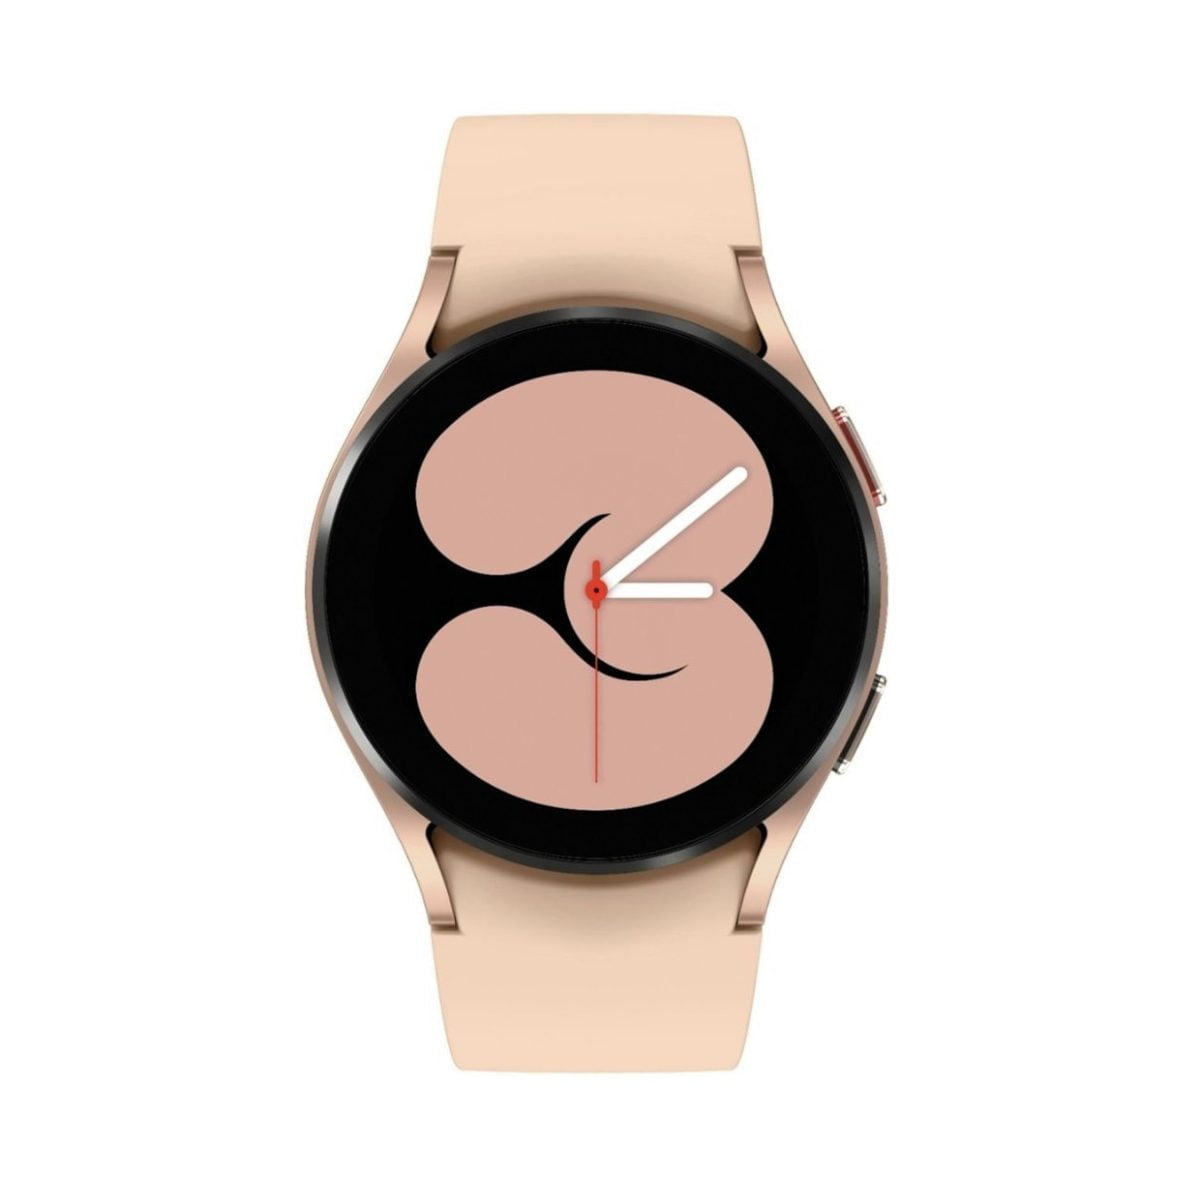 6464604 Sd Samsung &Lt;H1&Gt;Samsung Galaxy Watch4 Aluminum Smartwatch 40Mm Bt, Gps - Gold &Lt;Span Class=&Quot;Product-Data-Label Body-Copy&Quot;&Gt;&Lt;Strong&Gt;Model&Lt;/Strong&Gt;: Sm-R860Nzdaxaa&Lt;/Span&Gt;&Lt;/H1&Gt; Https://Www.youtube.com/Watch?V=Plte1N8Pl90 &Lt;Div Class=&Quot;Embedded-Component-Container Lv Product-Description&Quot;&Gt; &Lt;Div Id=&Quot;Shop-Product-Description-6031181&Quot; Class=&Quot;None&Quot; Data-Version=&Quot;1.3.38&Quot;&Gt; &Lt;Div Class=&Quot;Shop-Product-Description&Quot;&Gt;&Lt;Section Class=&Quot;Align-Heading-Left&Quot; Data-Reactroot=&Quot;&Quot;&Gt; &Lt;Div Class=&Quot;Long-Description-Container Body-Copy &Quot;&Gt; &Lt;Div Class=&Quot;Html-Fragment&Quot;&Gt; &Lt;Div&Gt; &Lt;Div&Gt;Crush Workouts And All Your Health Goals With Samsung Galaxy Watch4. Be Your Best With The Watch That Knows You Best.&Lt;/Div&Gt; &Lt;Div&Gt;We All Want To Know More About Ourselves, So We Can Be The Best Version Of Ourselves. That'S Why We Engineered The All-New Galaxy Watch4 Classic To Be The Stylish Companion To Your Journey Towards A Healthier You Some Looks Are Timeless, Like The Galaxy Watch4 Classic’s Rotating Bezel And Vivid Screen. The Refined Design Adds Sophistication To Your Wrist For An Elevated Style. Its High-End Stainless Steel Materials Shows Off Its Powerful And Intuitive Functionality&Lt;/Div&Gt; &Lt;/Div&Gt; &Lt;/Div&Gt; &Lt;/Div&Gt; &Lt;/Section&Gt;&Lt;/Div&Gt; &Lt;/Div&Gt; &Lt;/Div&Gt; Samsung Galaxy Watch4 Samsung Galaxy Watch4 Aluminum Smartwatch 40Mm- Gold